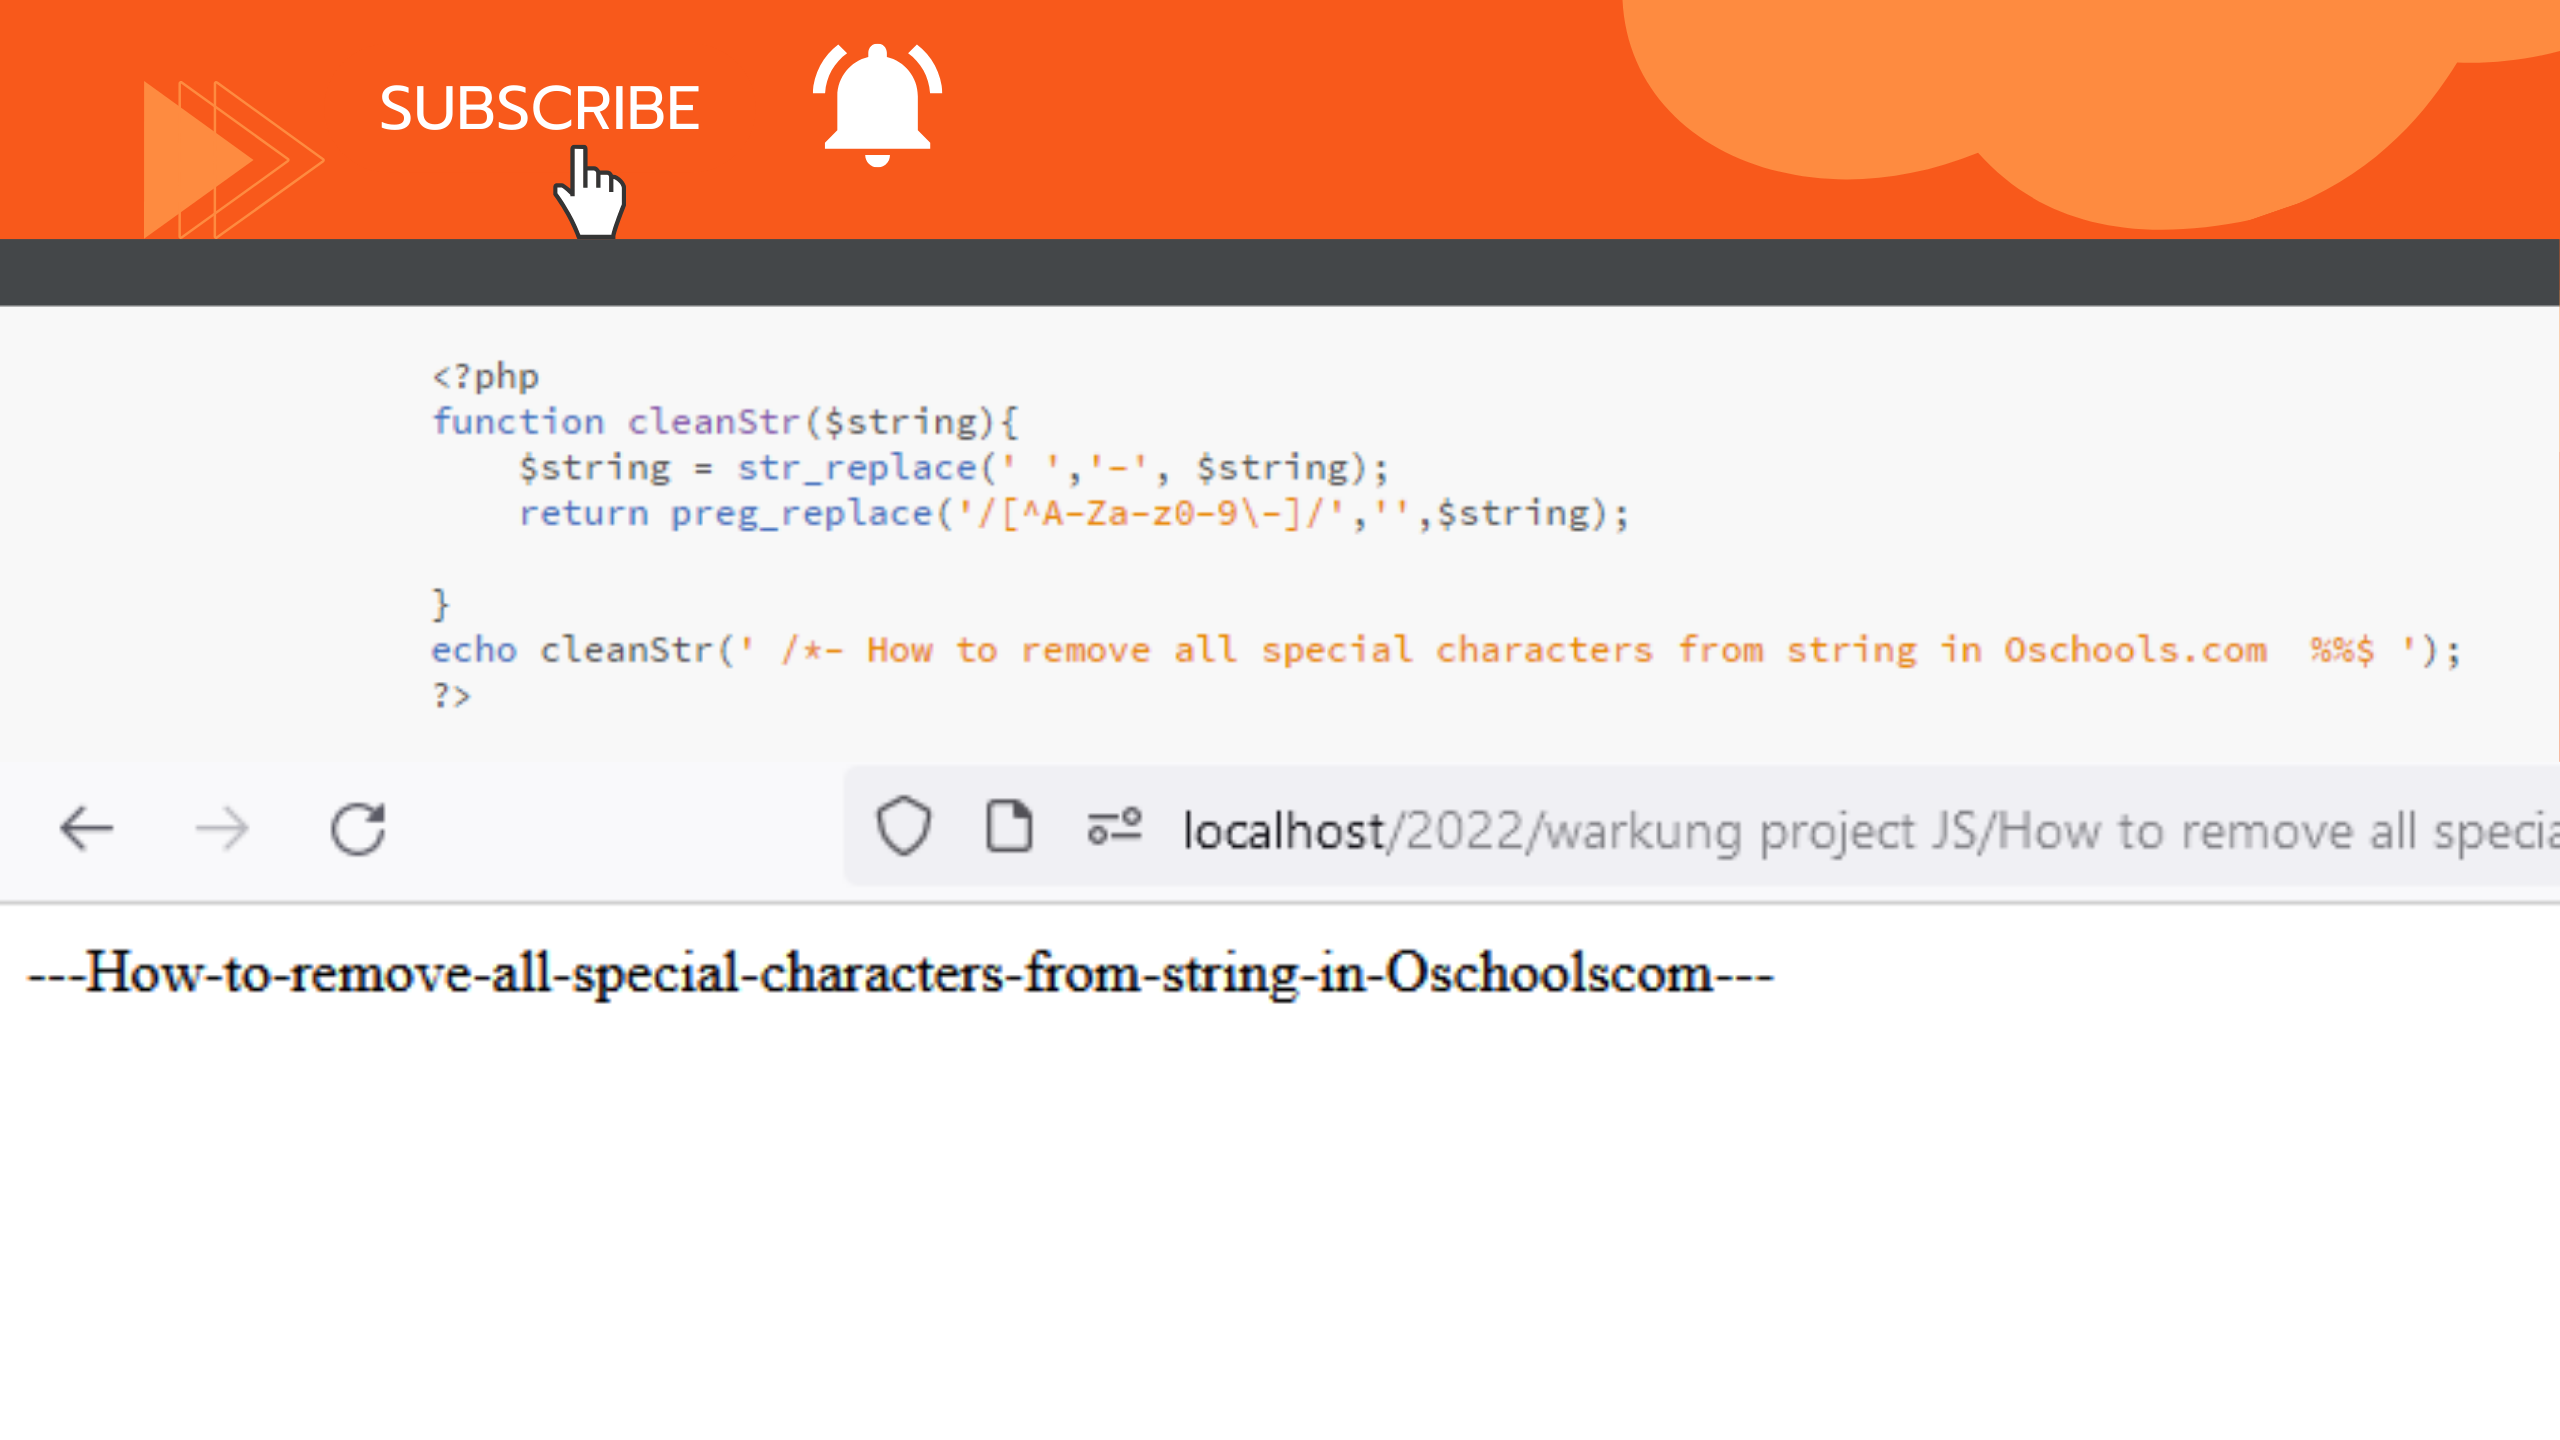 How to remove all special characters from string in Oschools.com